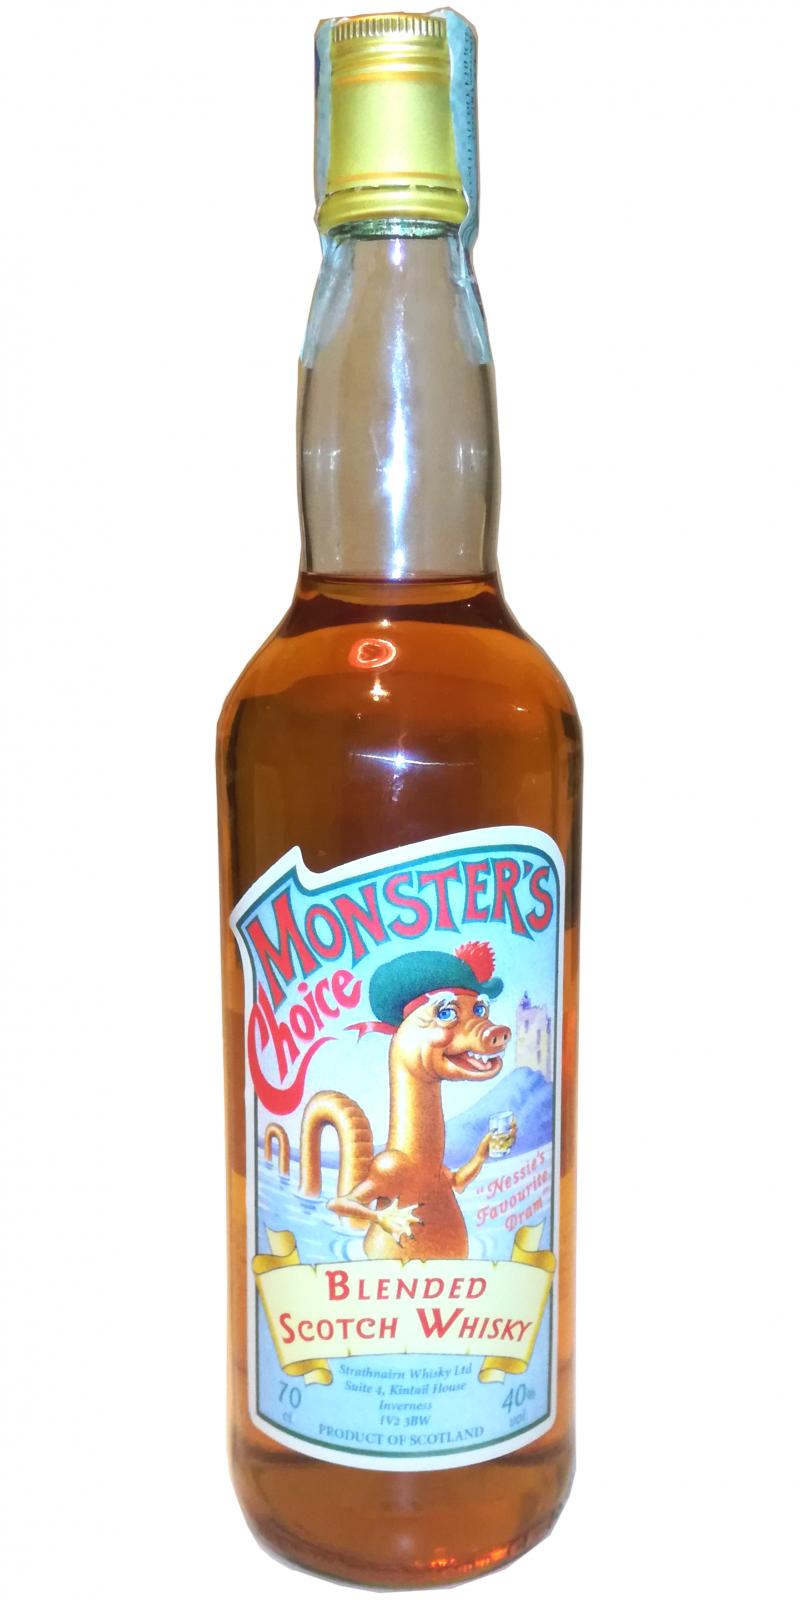 Monster's Choice Blended Scotch Whisky